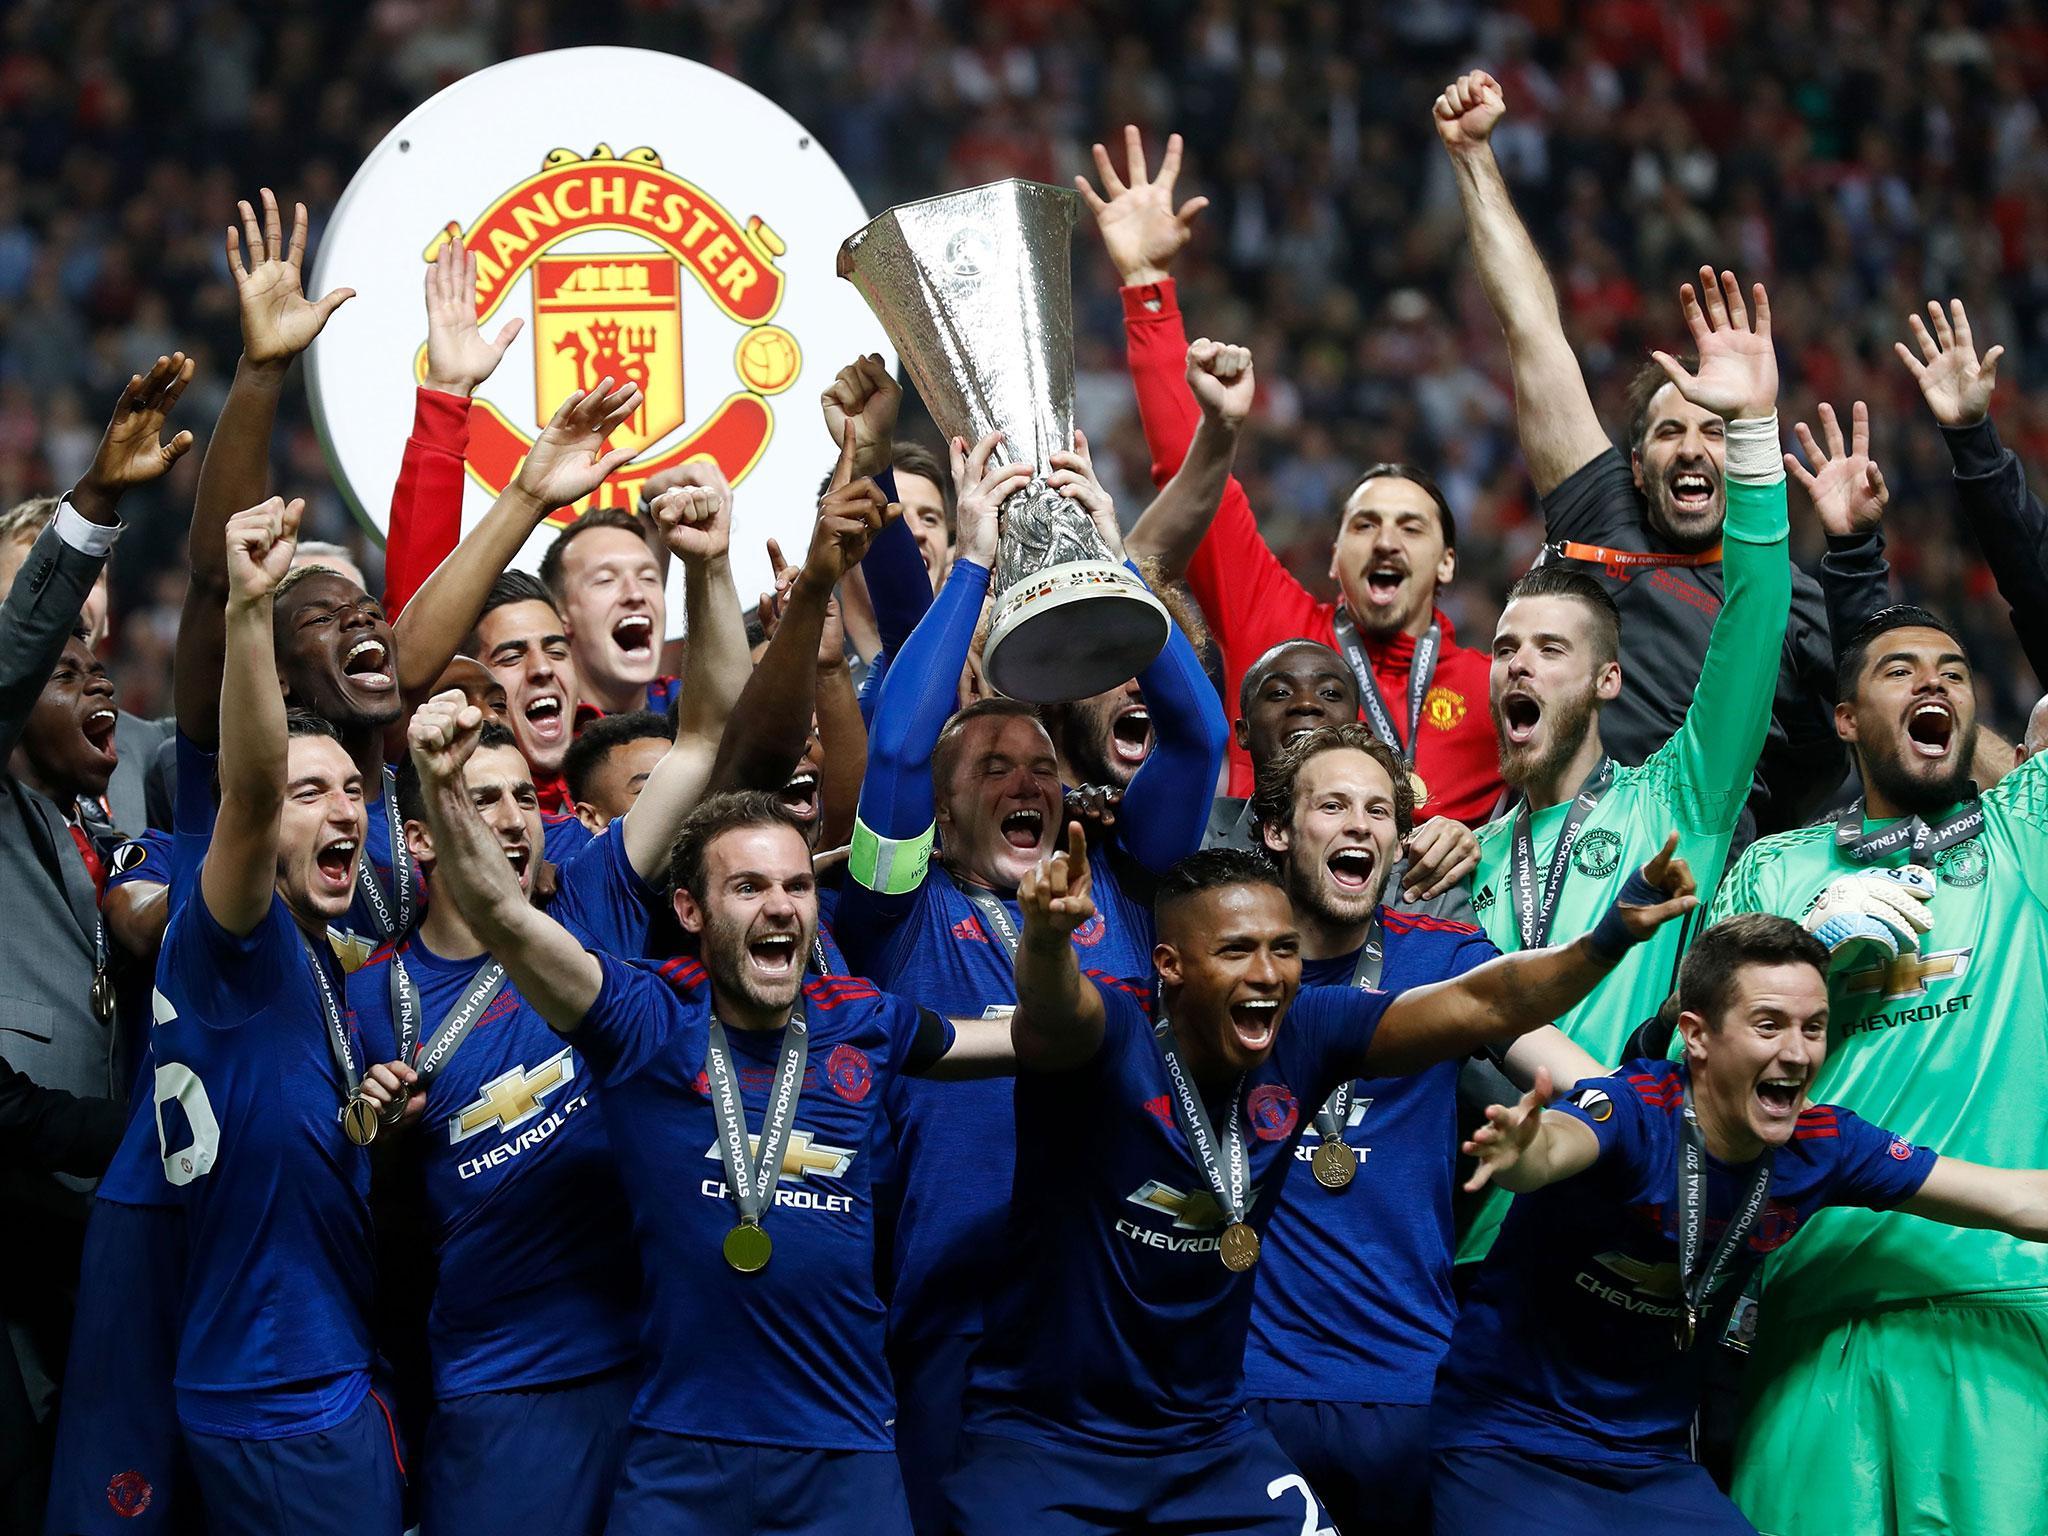 United will return to the Champions League next season after victory in Europe’s second-tier competition, the Europa League